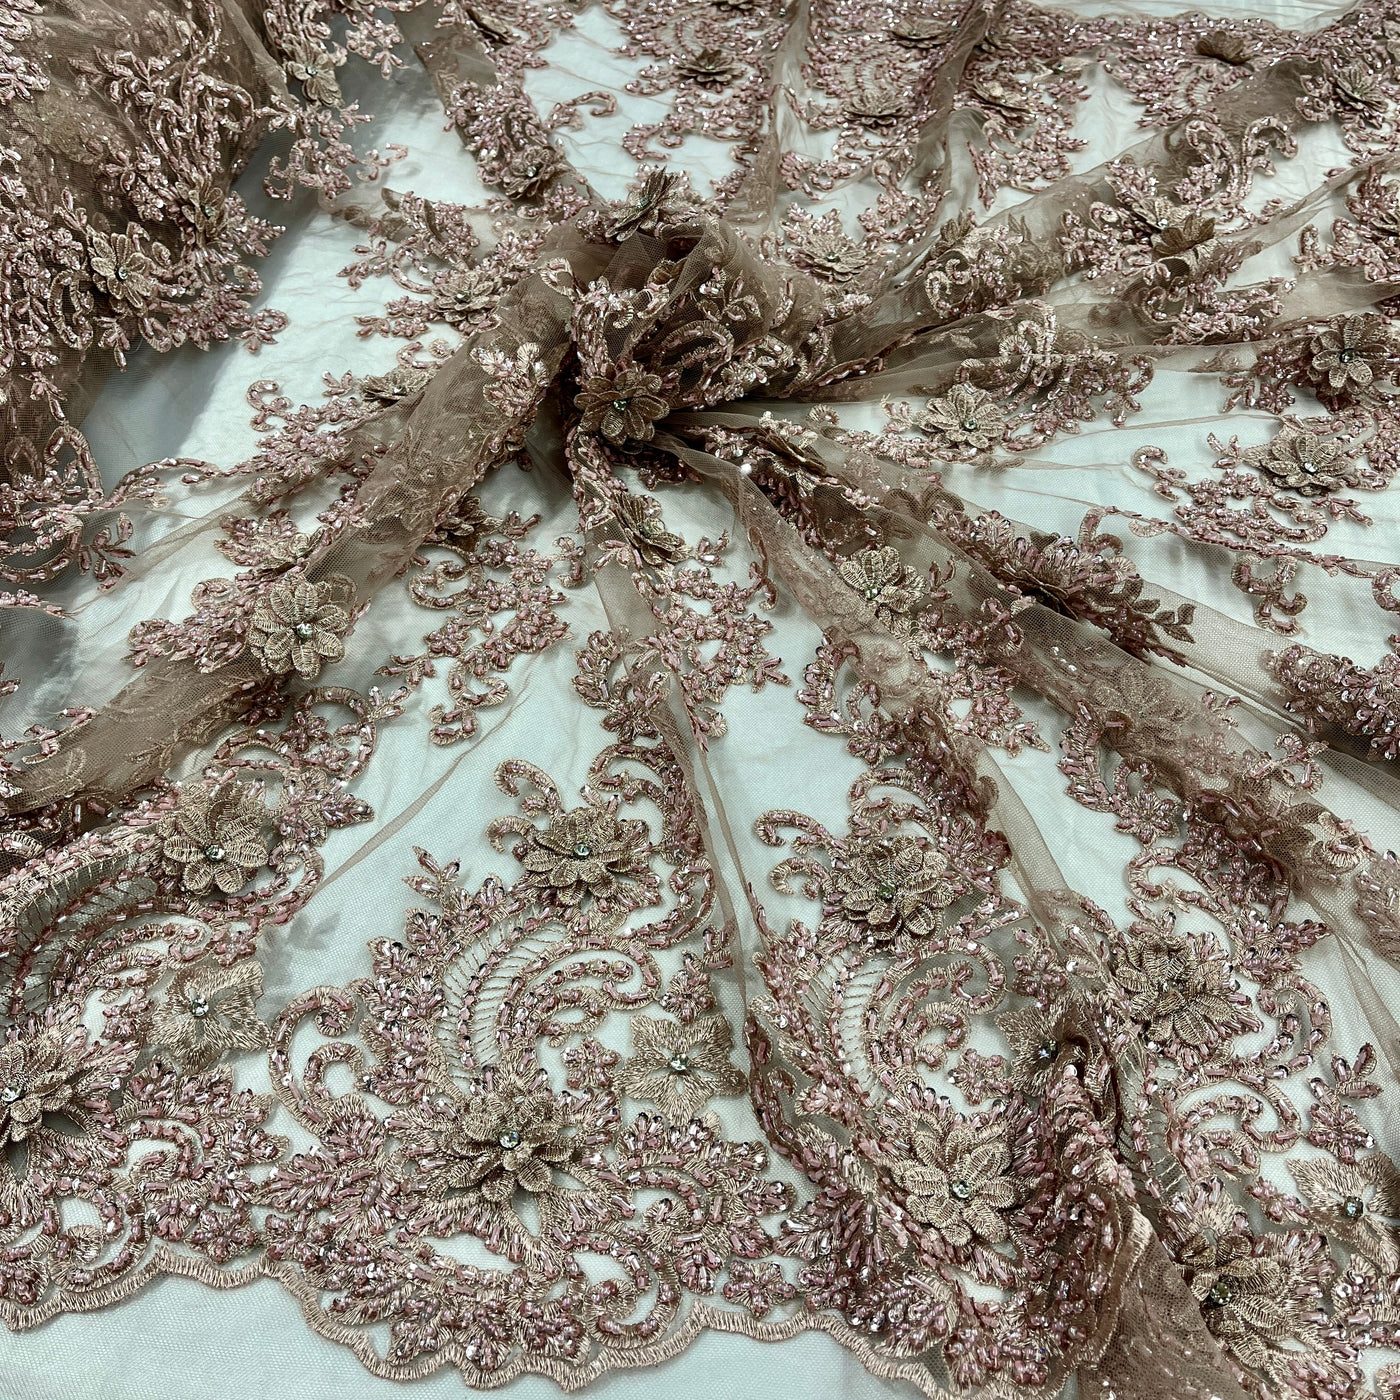 Beaded 3D Floral Lace Fabric Embroidered on 100% Polyester Net Mesh | Lace USA - GD-2302